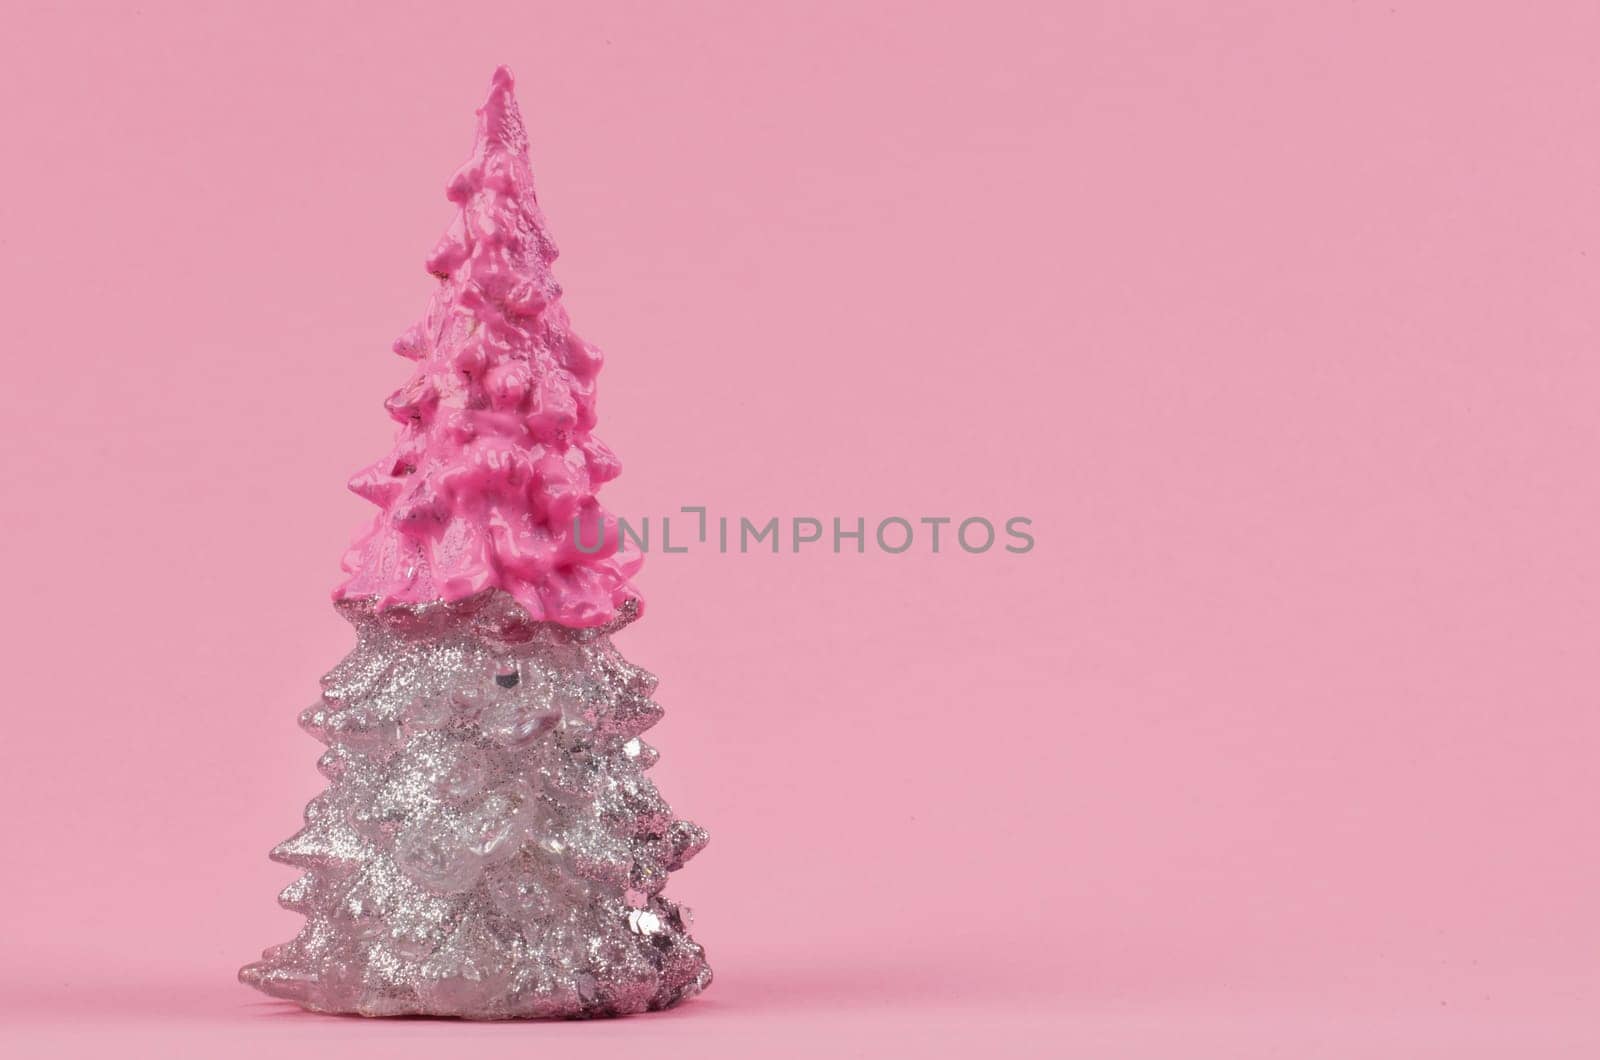 Christmas composition. Pink and silver Christmas tree on a pink background. Happy Holidays. minimal new year concept.